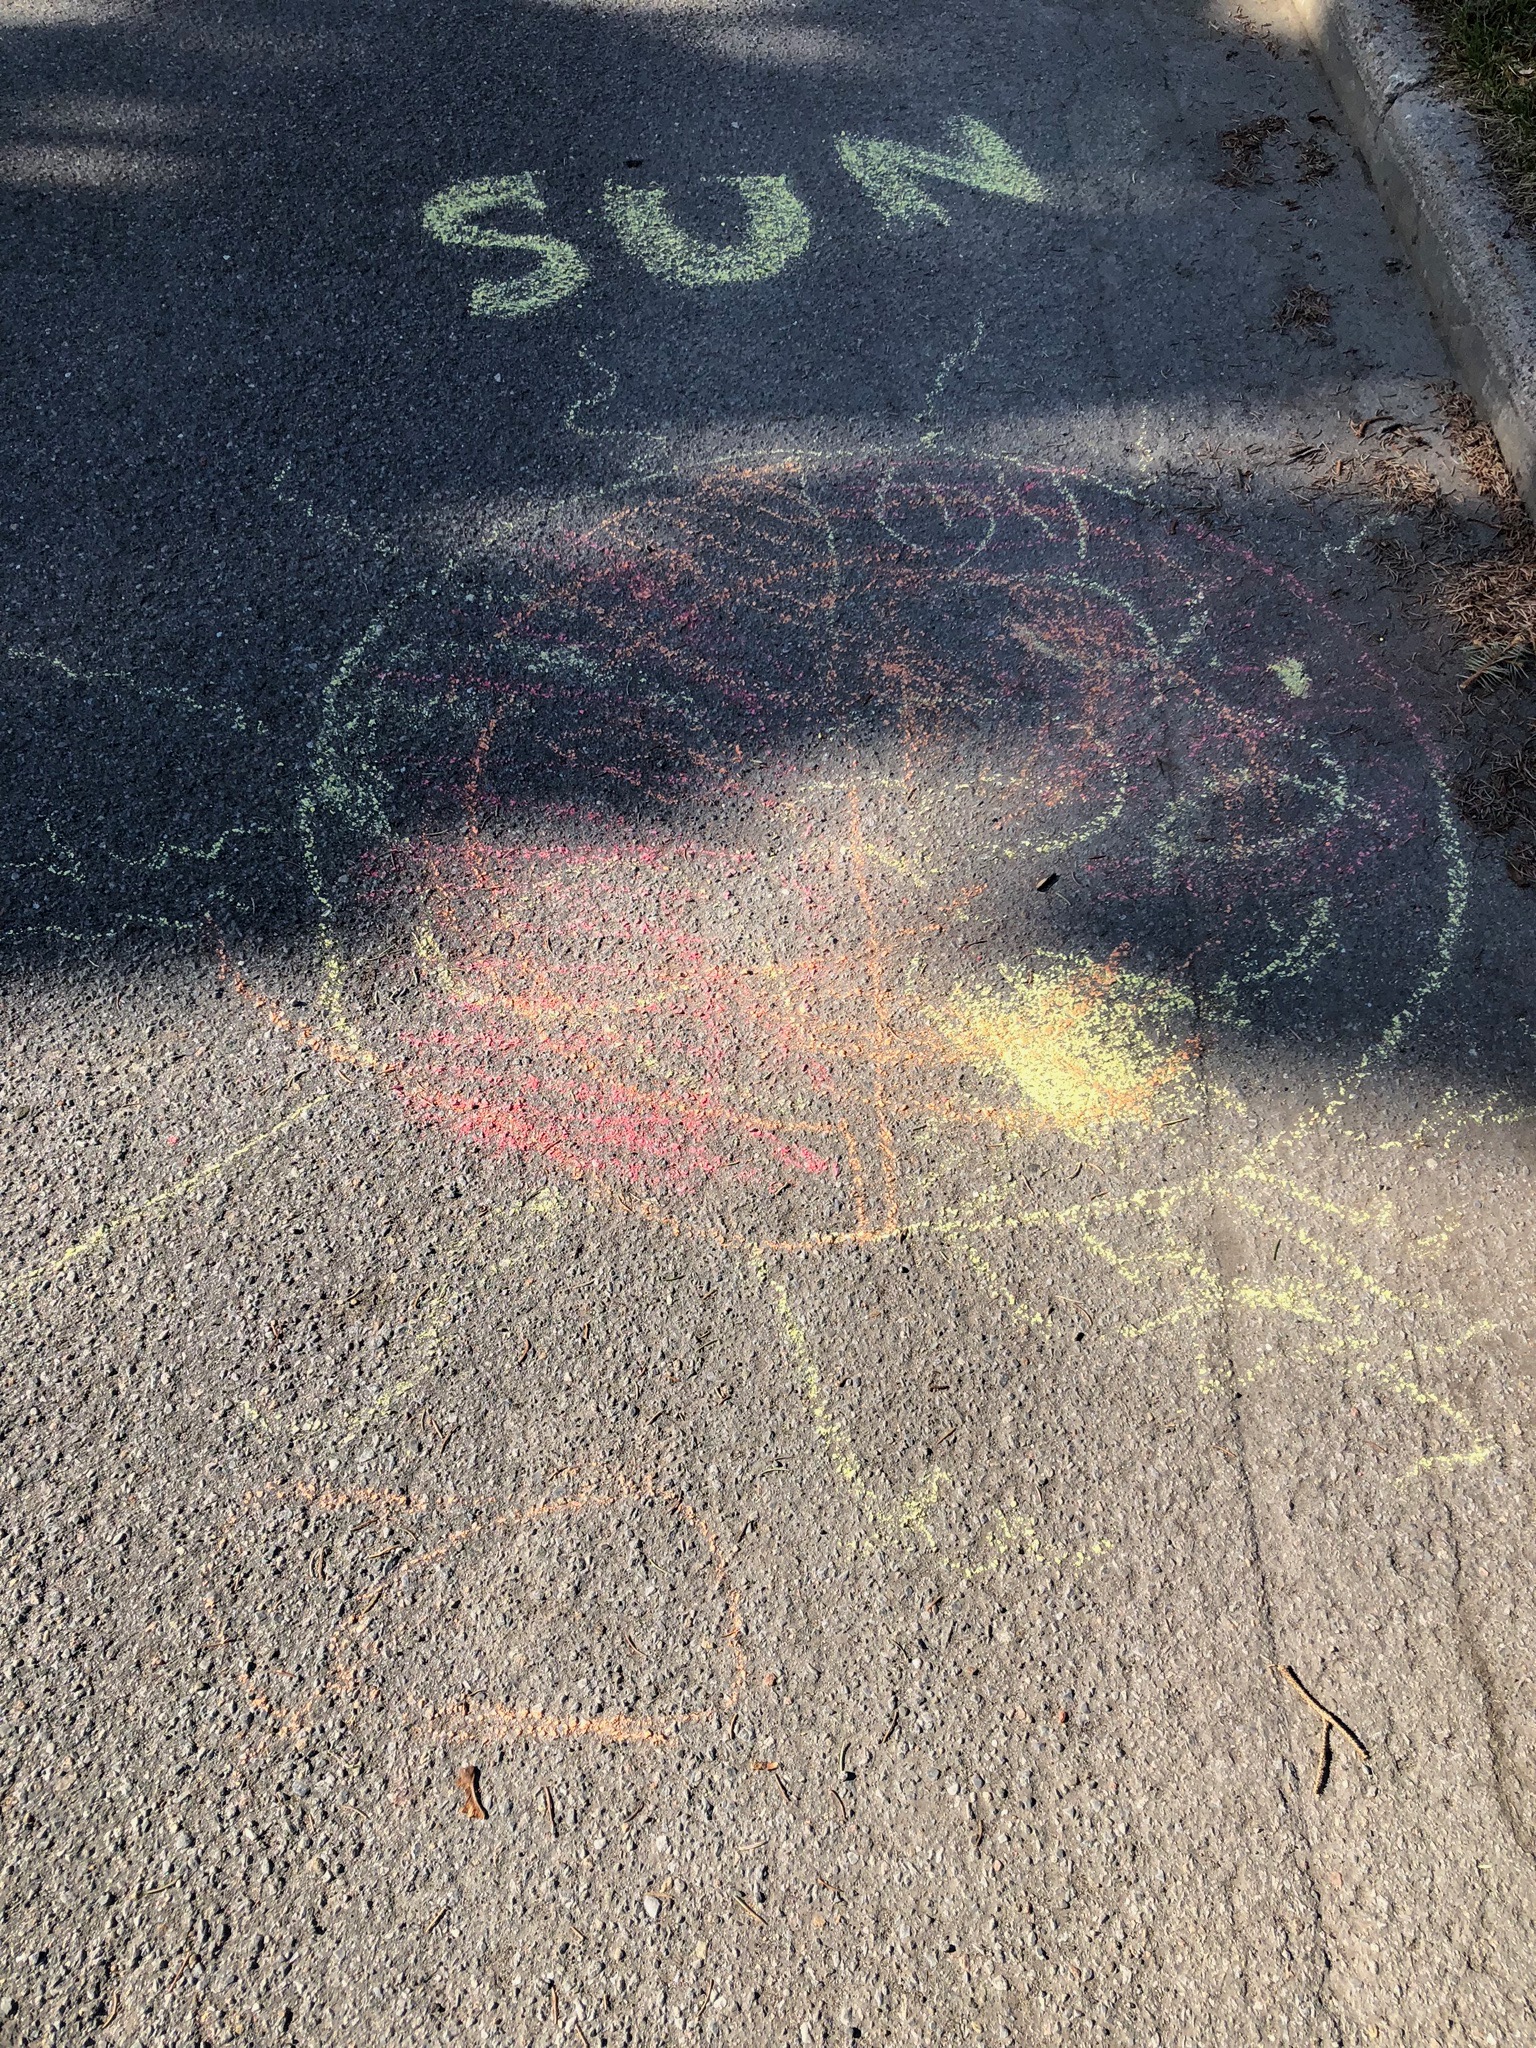 A chalk drawing of a sun with the label "sun". The sun is filled with yellow, orange, and red swirls.